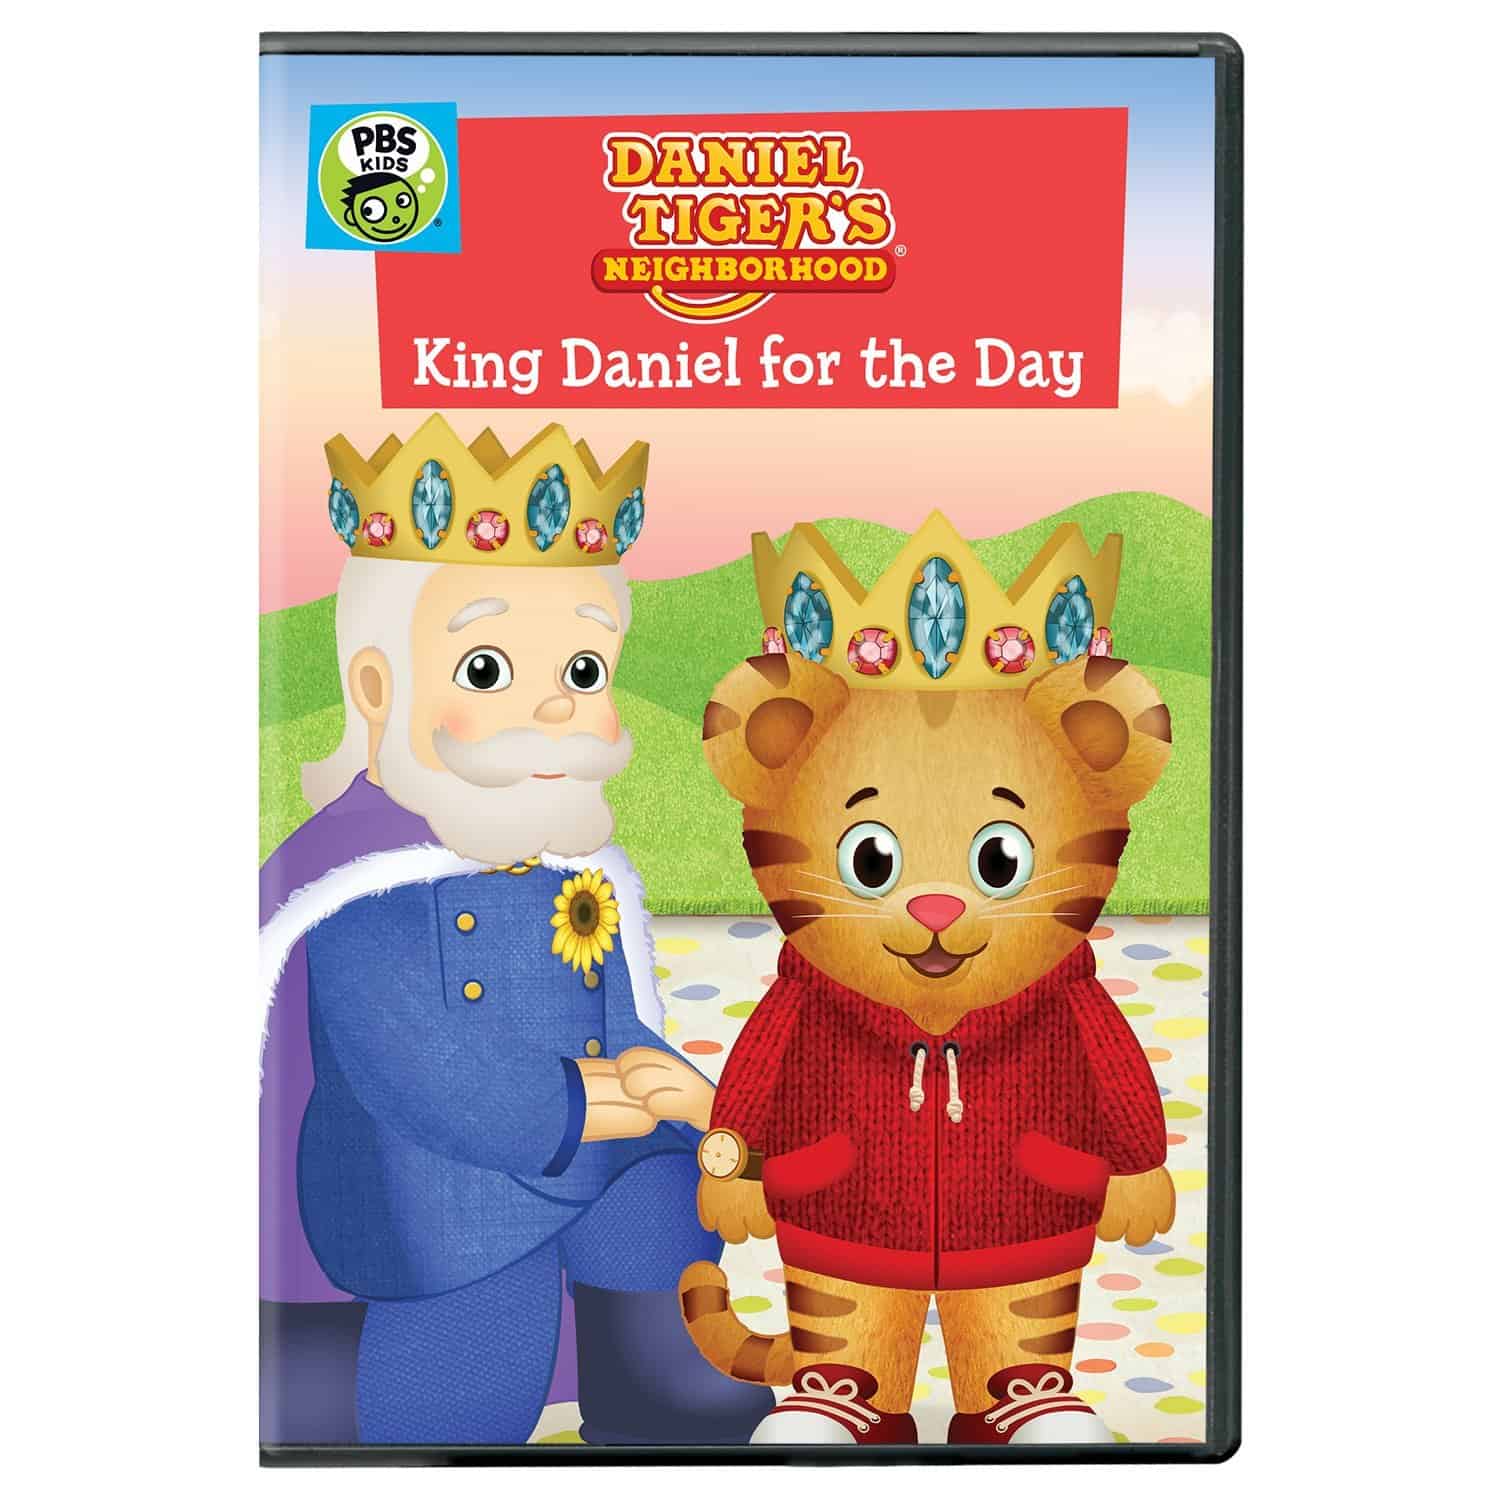 King Daniel for the Day on DVD from PBS